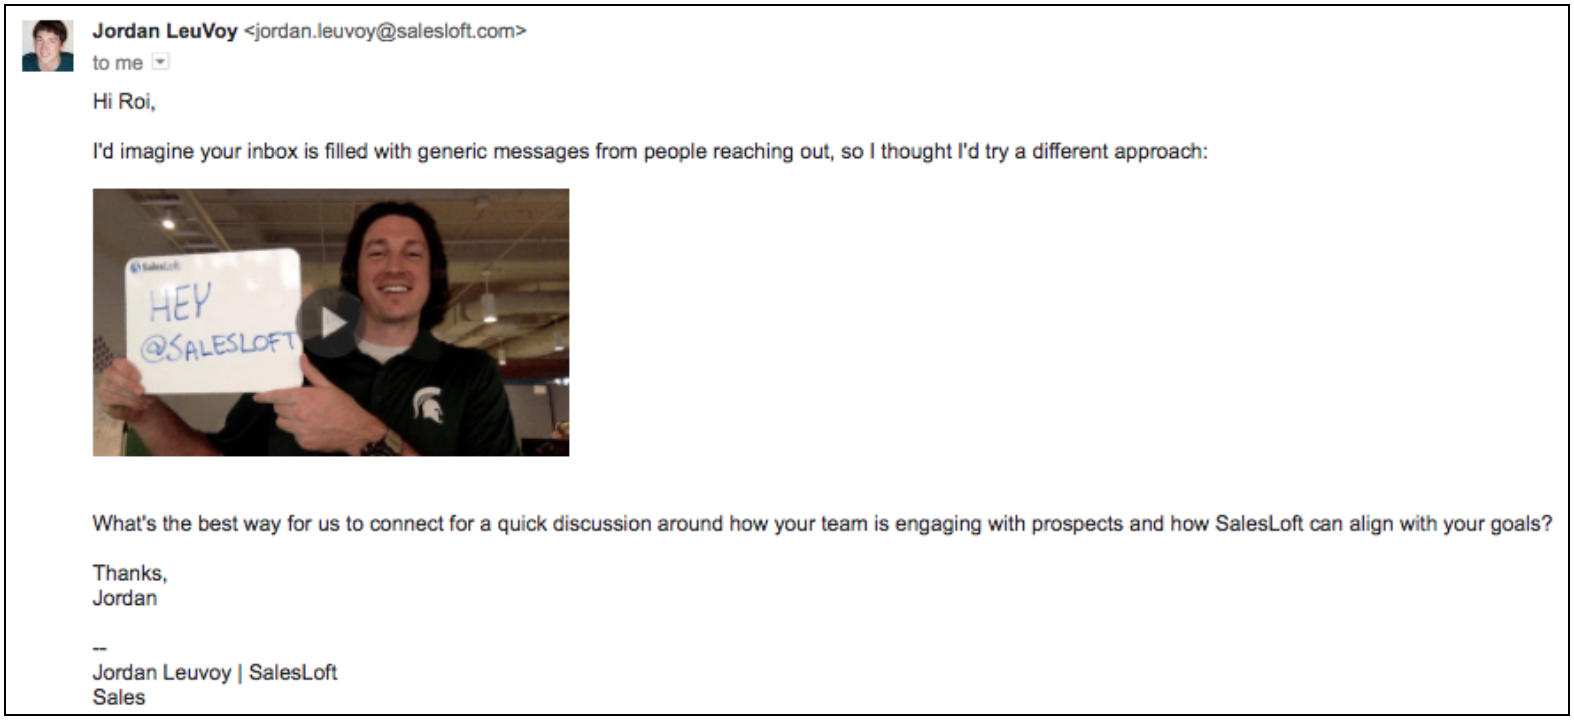 Example of a positive match for a video email in our experiment